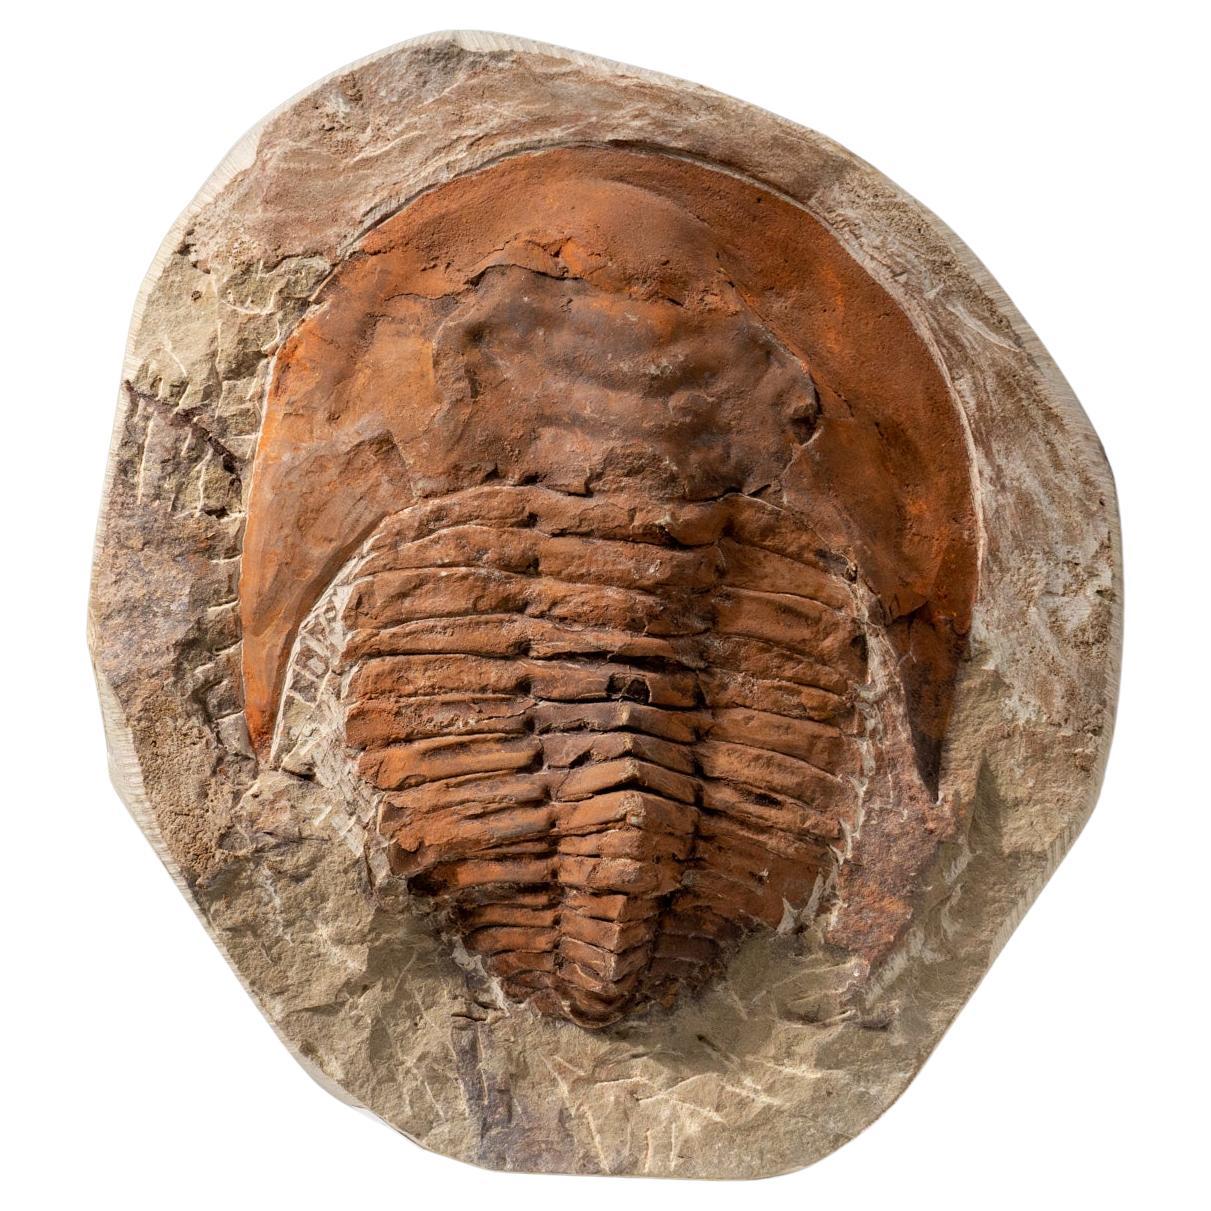 Genuine Andalusiana Paradoxides Trilobite with acrylic display stand (2.8 lbs)